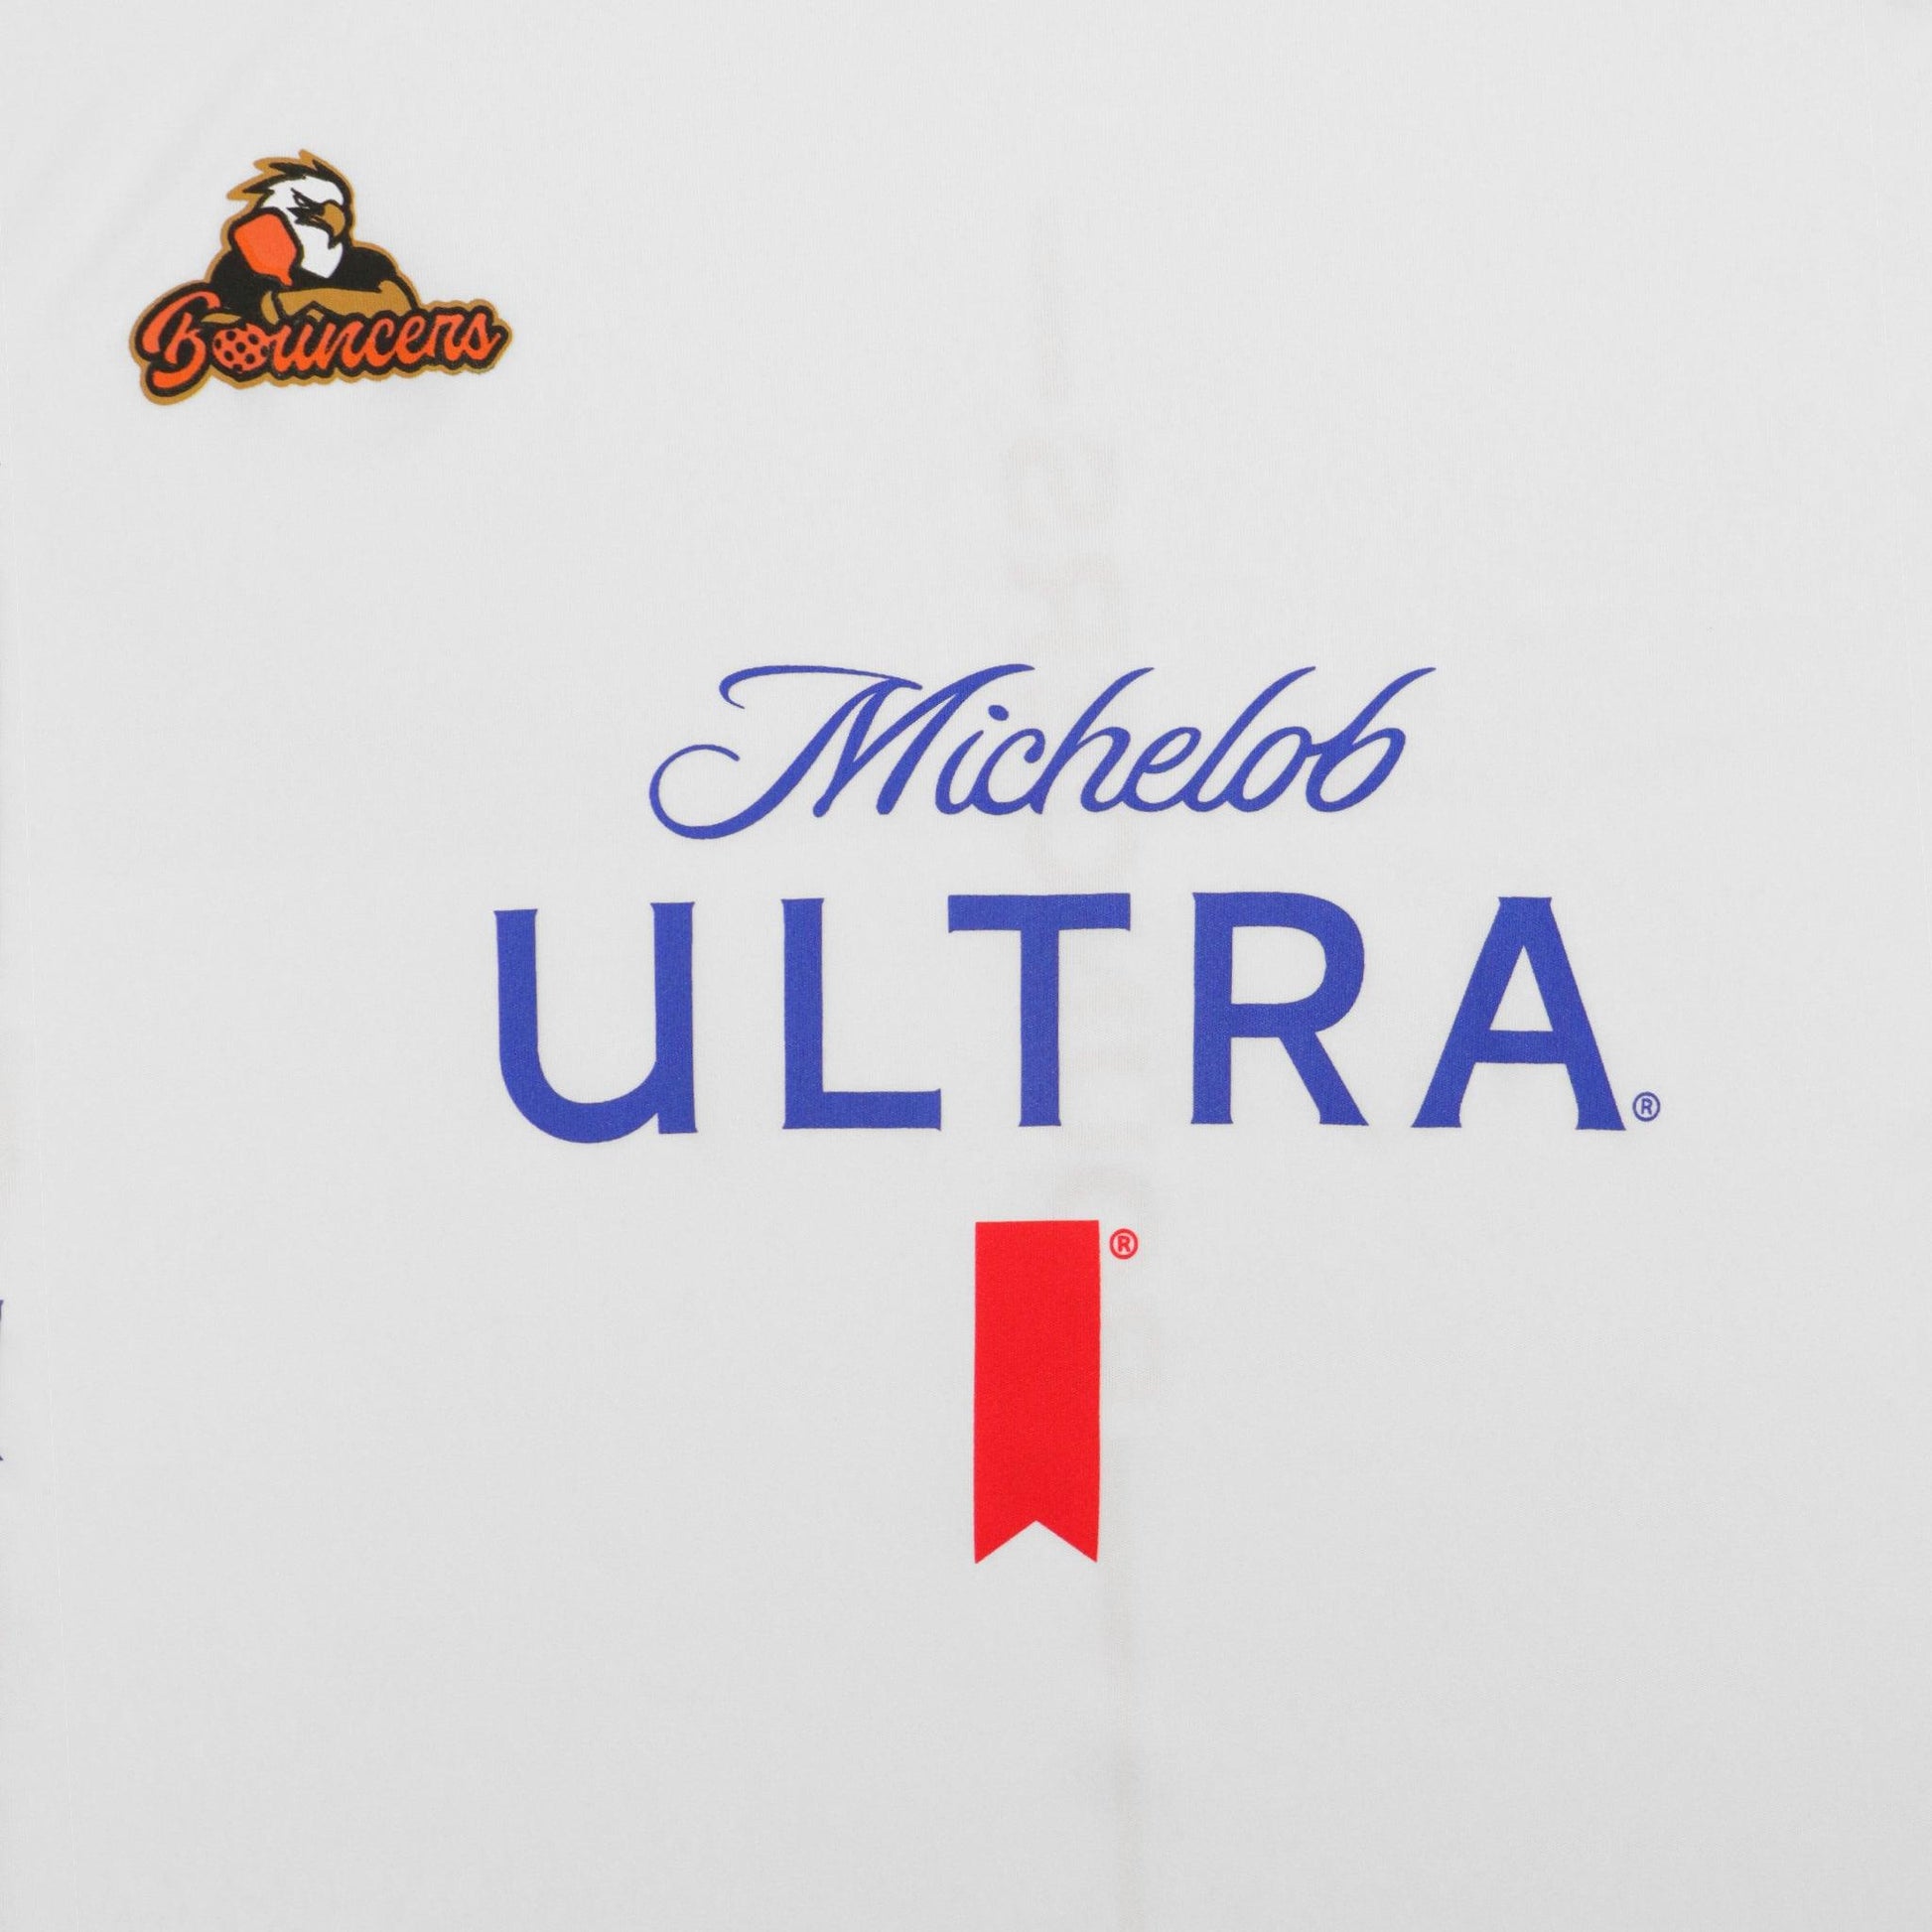 Close up of Michelob ULTRA logo on front of shirt